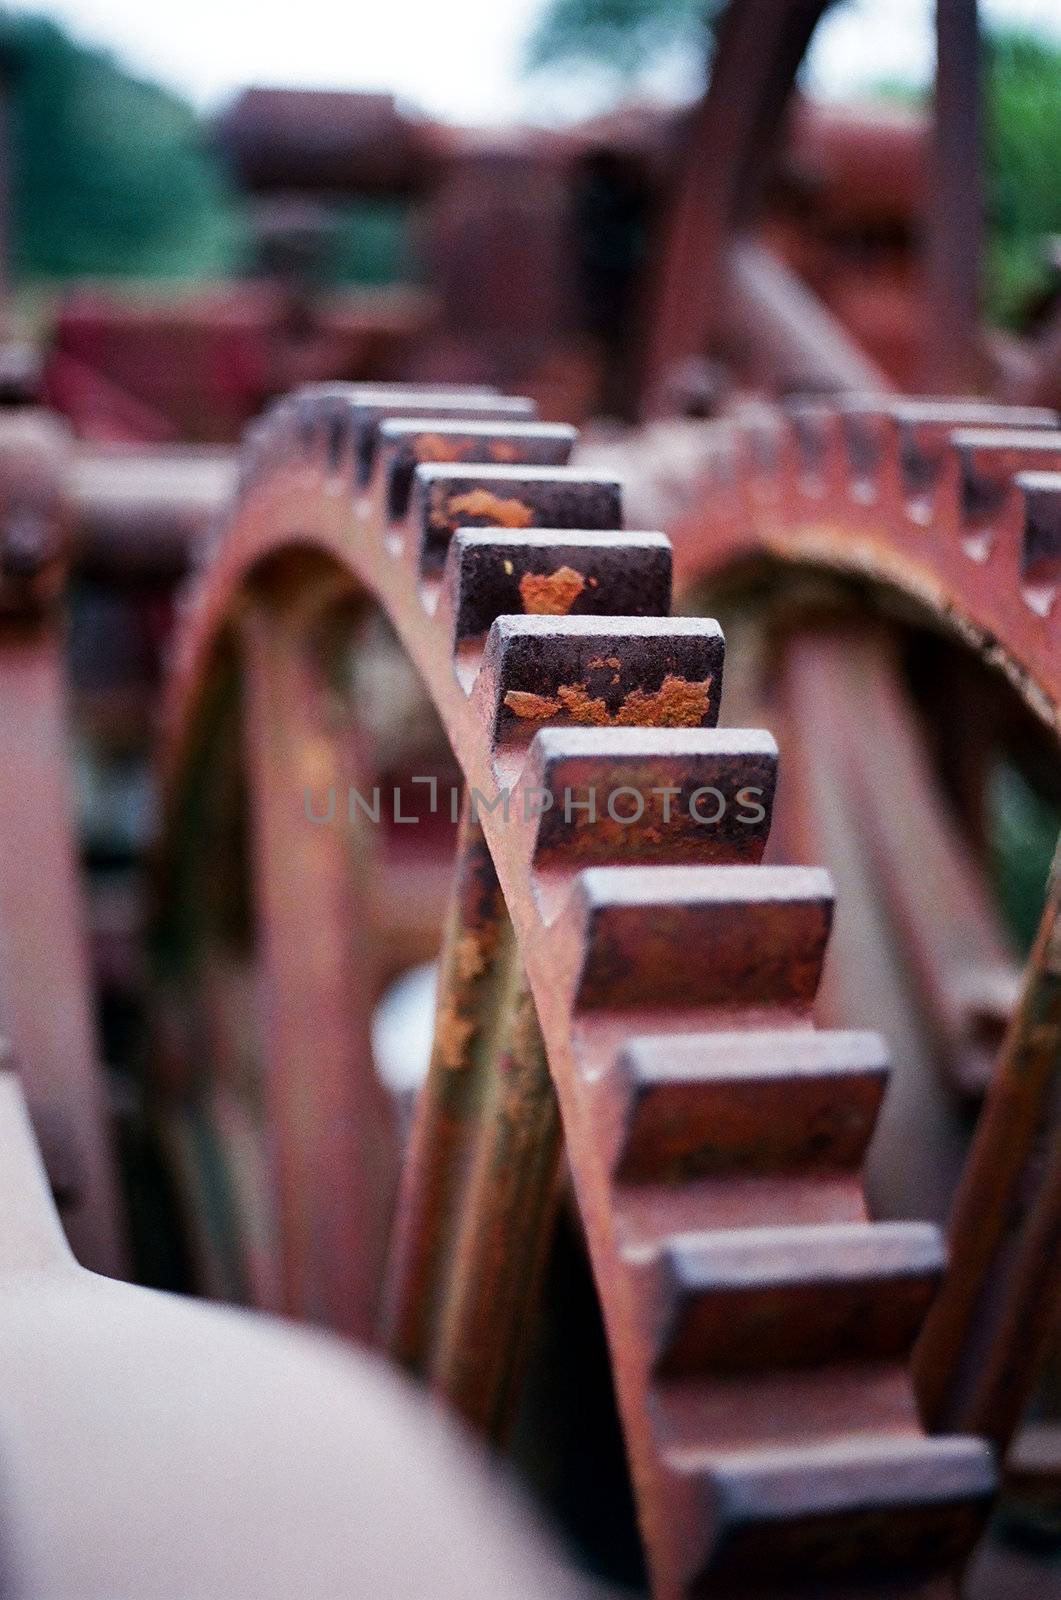 gears on a piece of farm equipment used for harvesting.